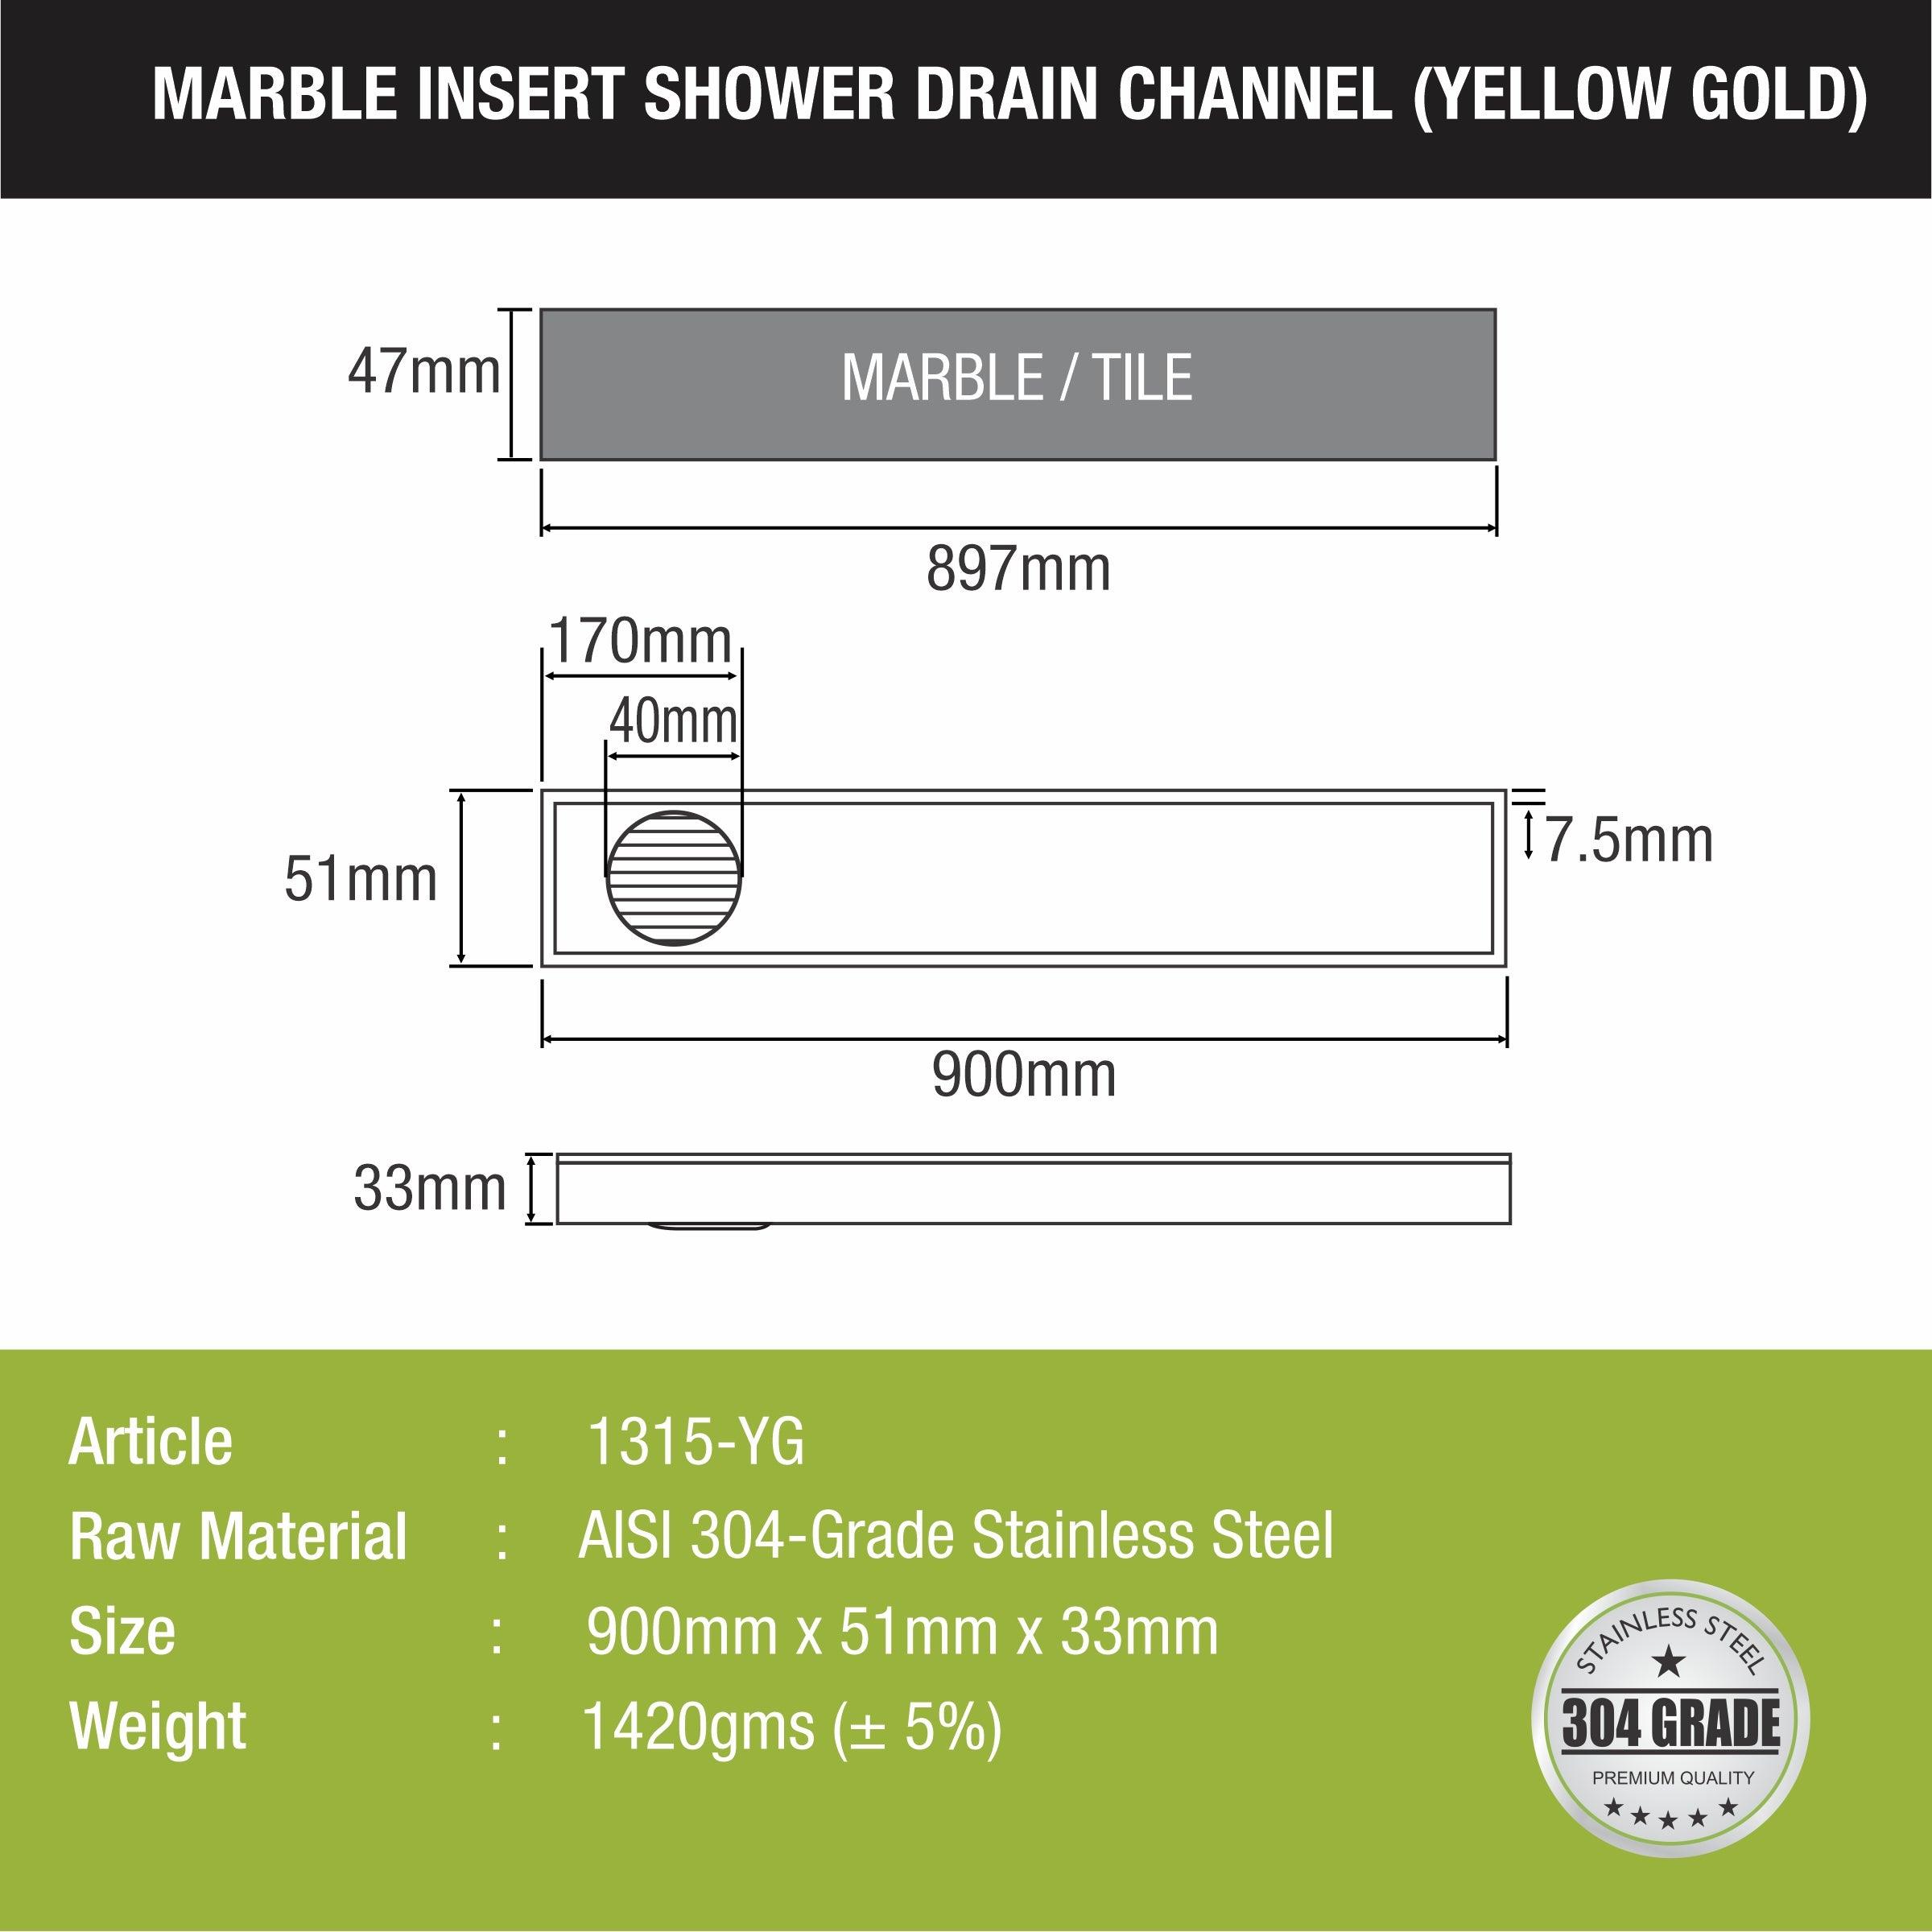 Marble Insert Shower Drain Channel - Yellow Gold (36 x 2 Inches) sizes and dimensions